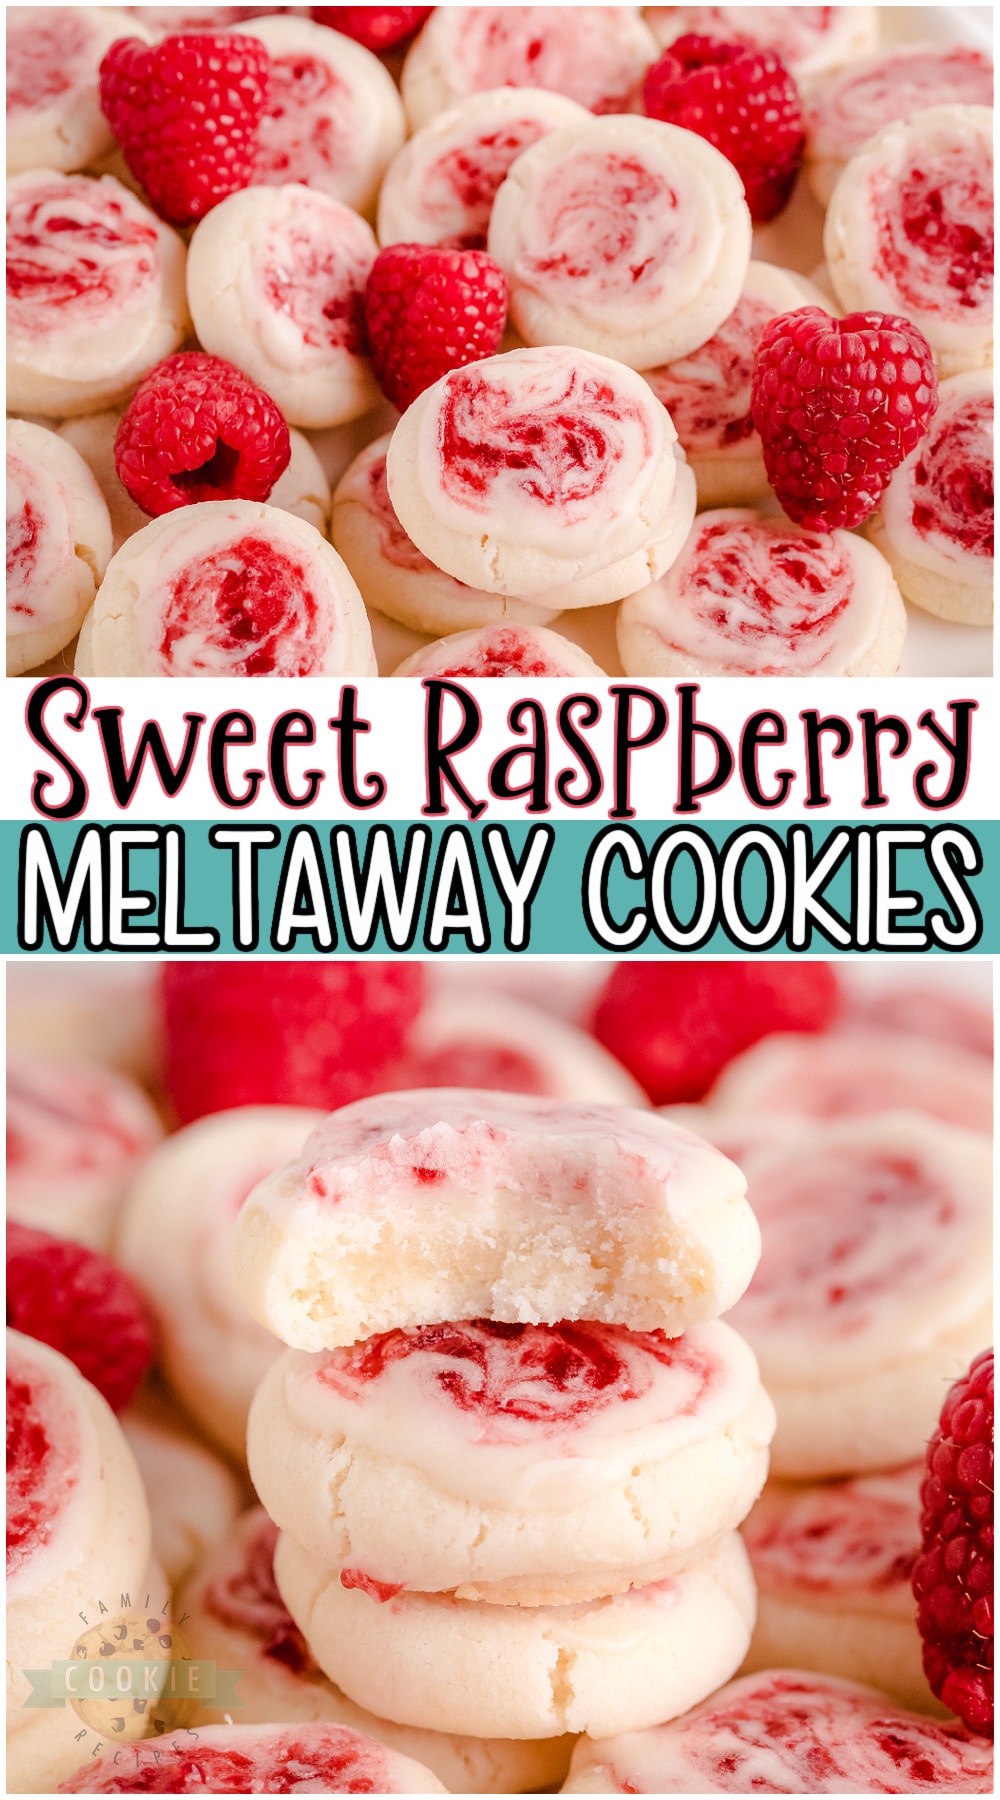 Raspberry Meltaway Cookies just melt in your mouth! Soft dough made with cornstarch and powdered sugar compliments these raspberry cookies beautifully. Perfect topped with a simple almond glaze swirled with raspberry jam. #Cookies #meltaway #raspberry #baking #dessert #cookierecipe from FAMILY COOKIE RECIPE via @buttergirls